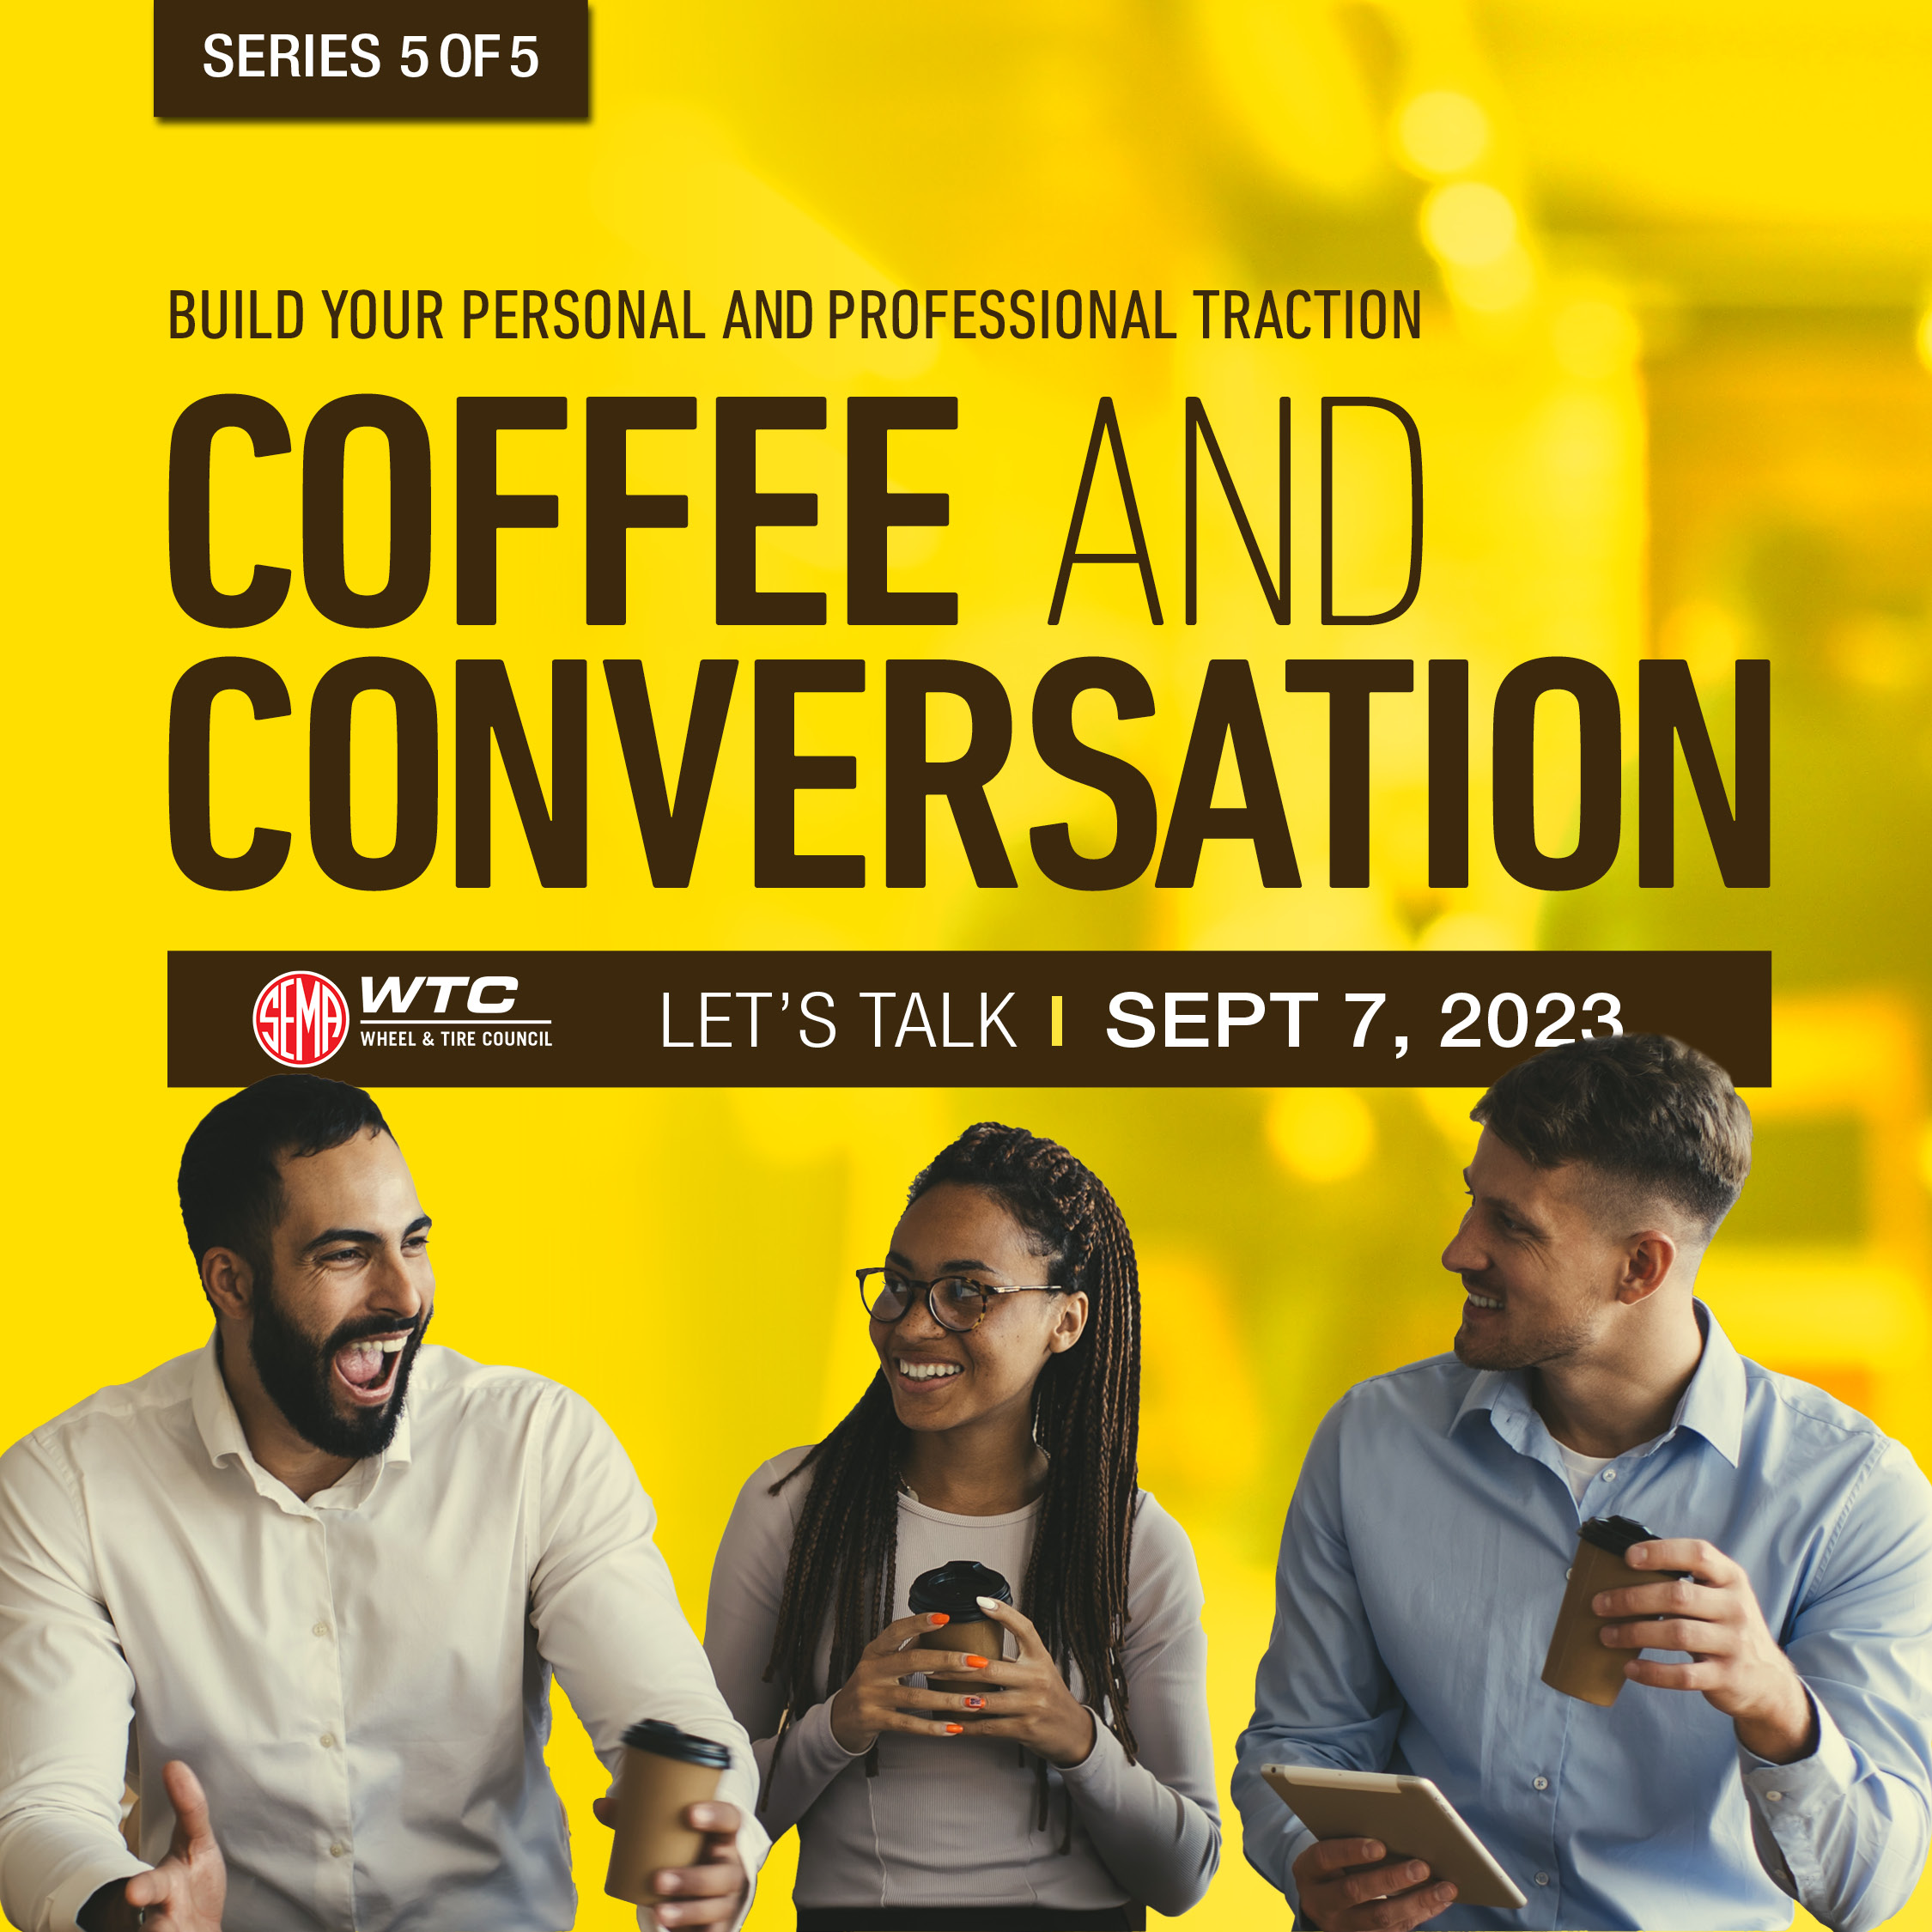 WTC - Coffee and Conversation